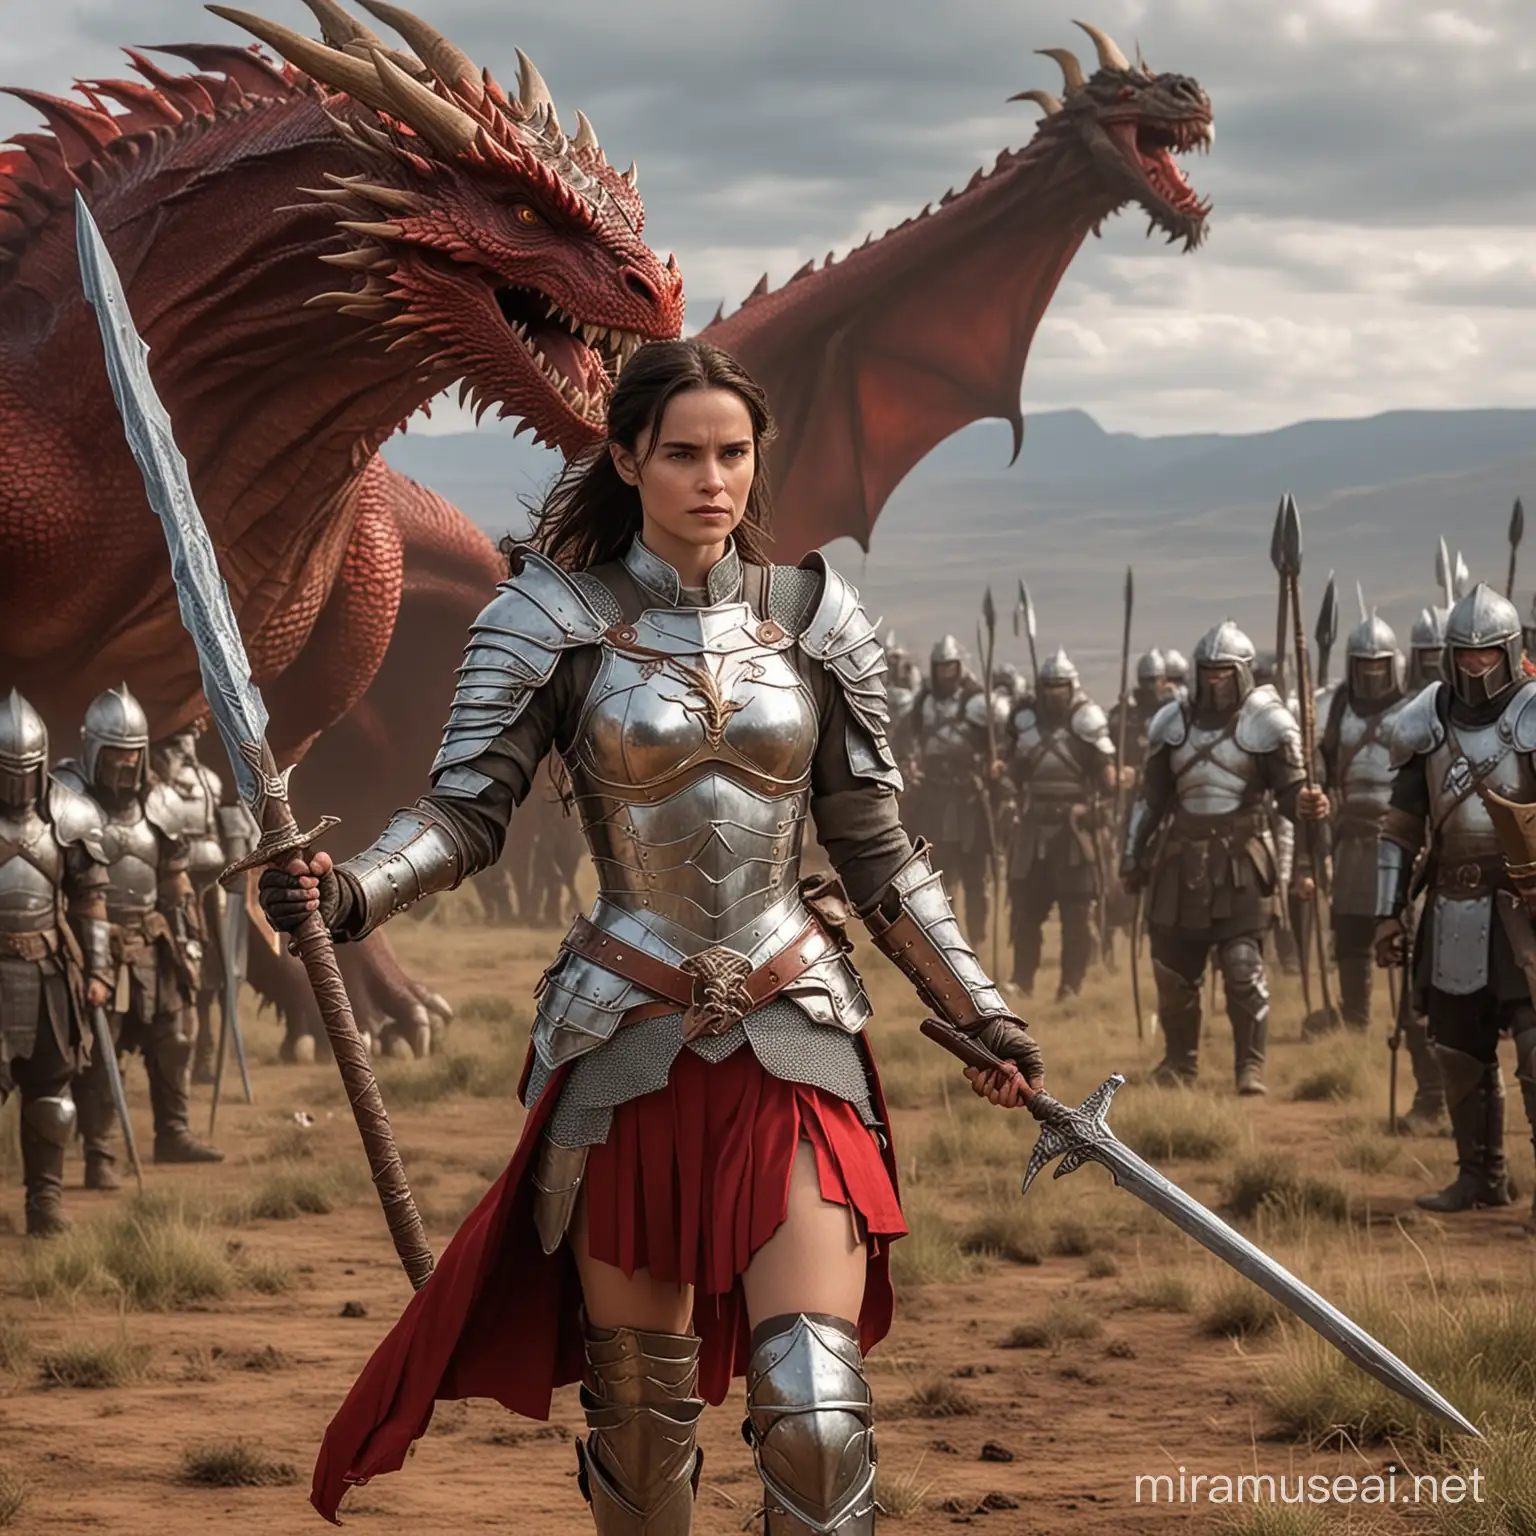 Brave Jennifer Connely Battles Red Dragon and Orcs with Spear in Armor